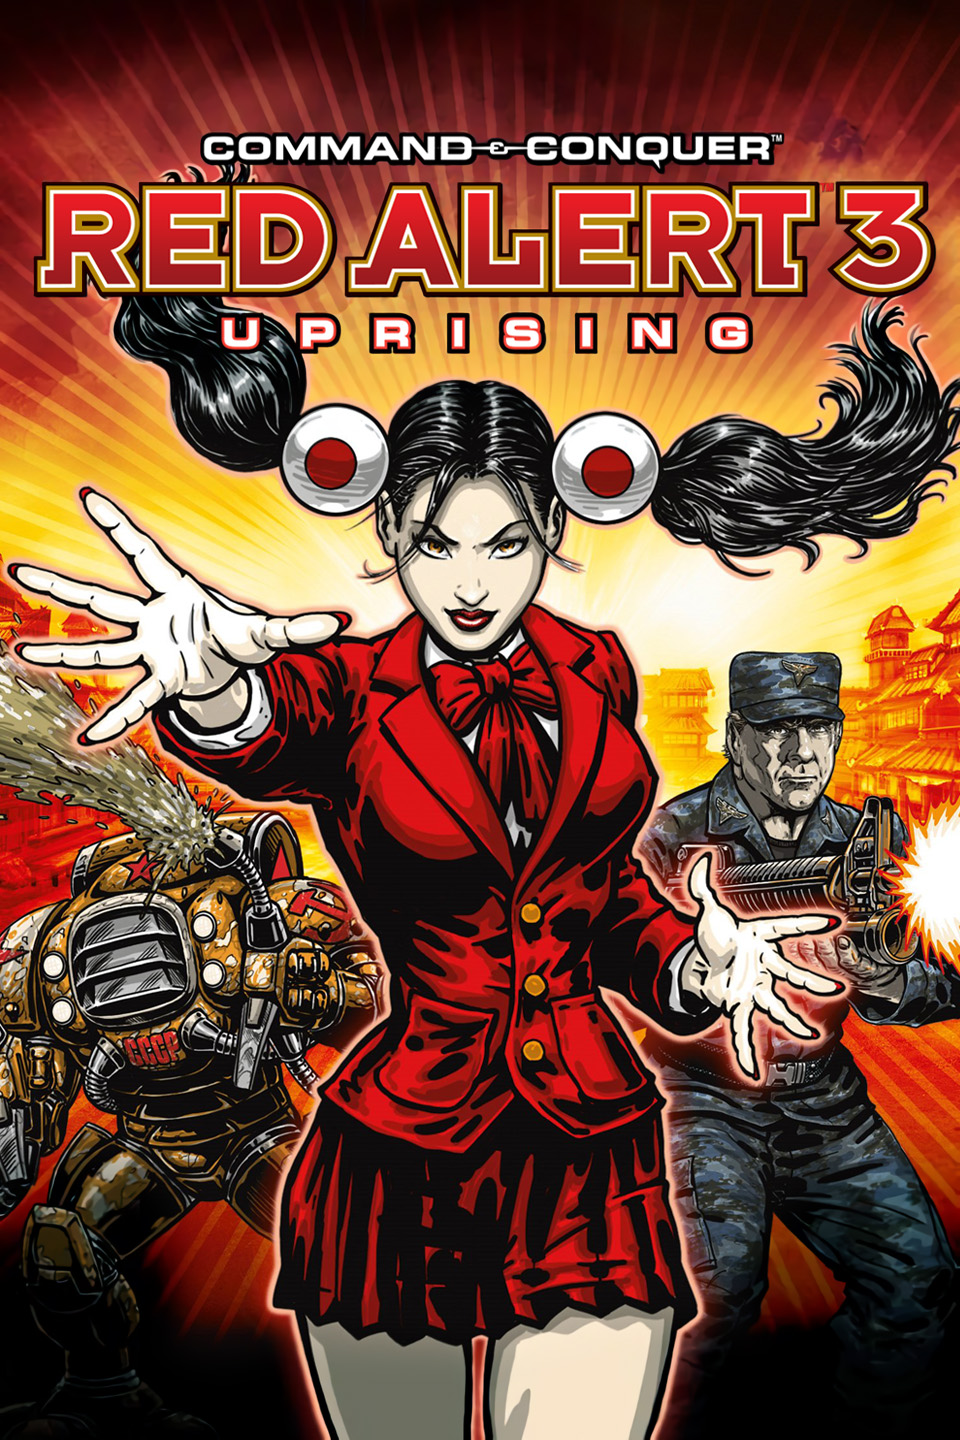 Command & Conquer: Red Alert 3 - Uprising manual - Command & Conquer Wiki covering Tiberium, Red and Generals universes